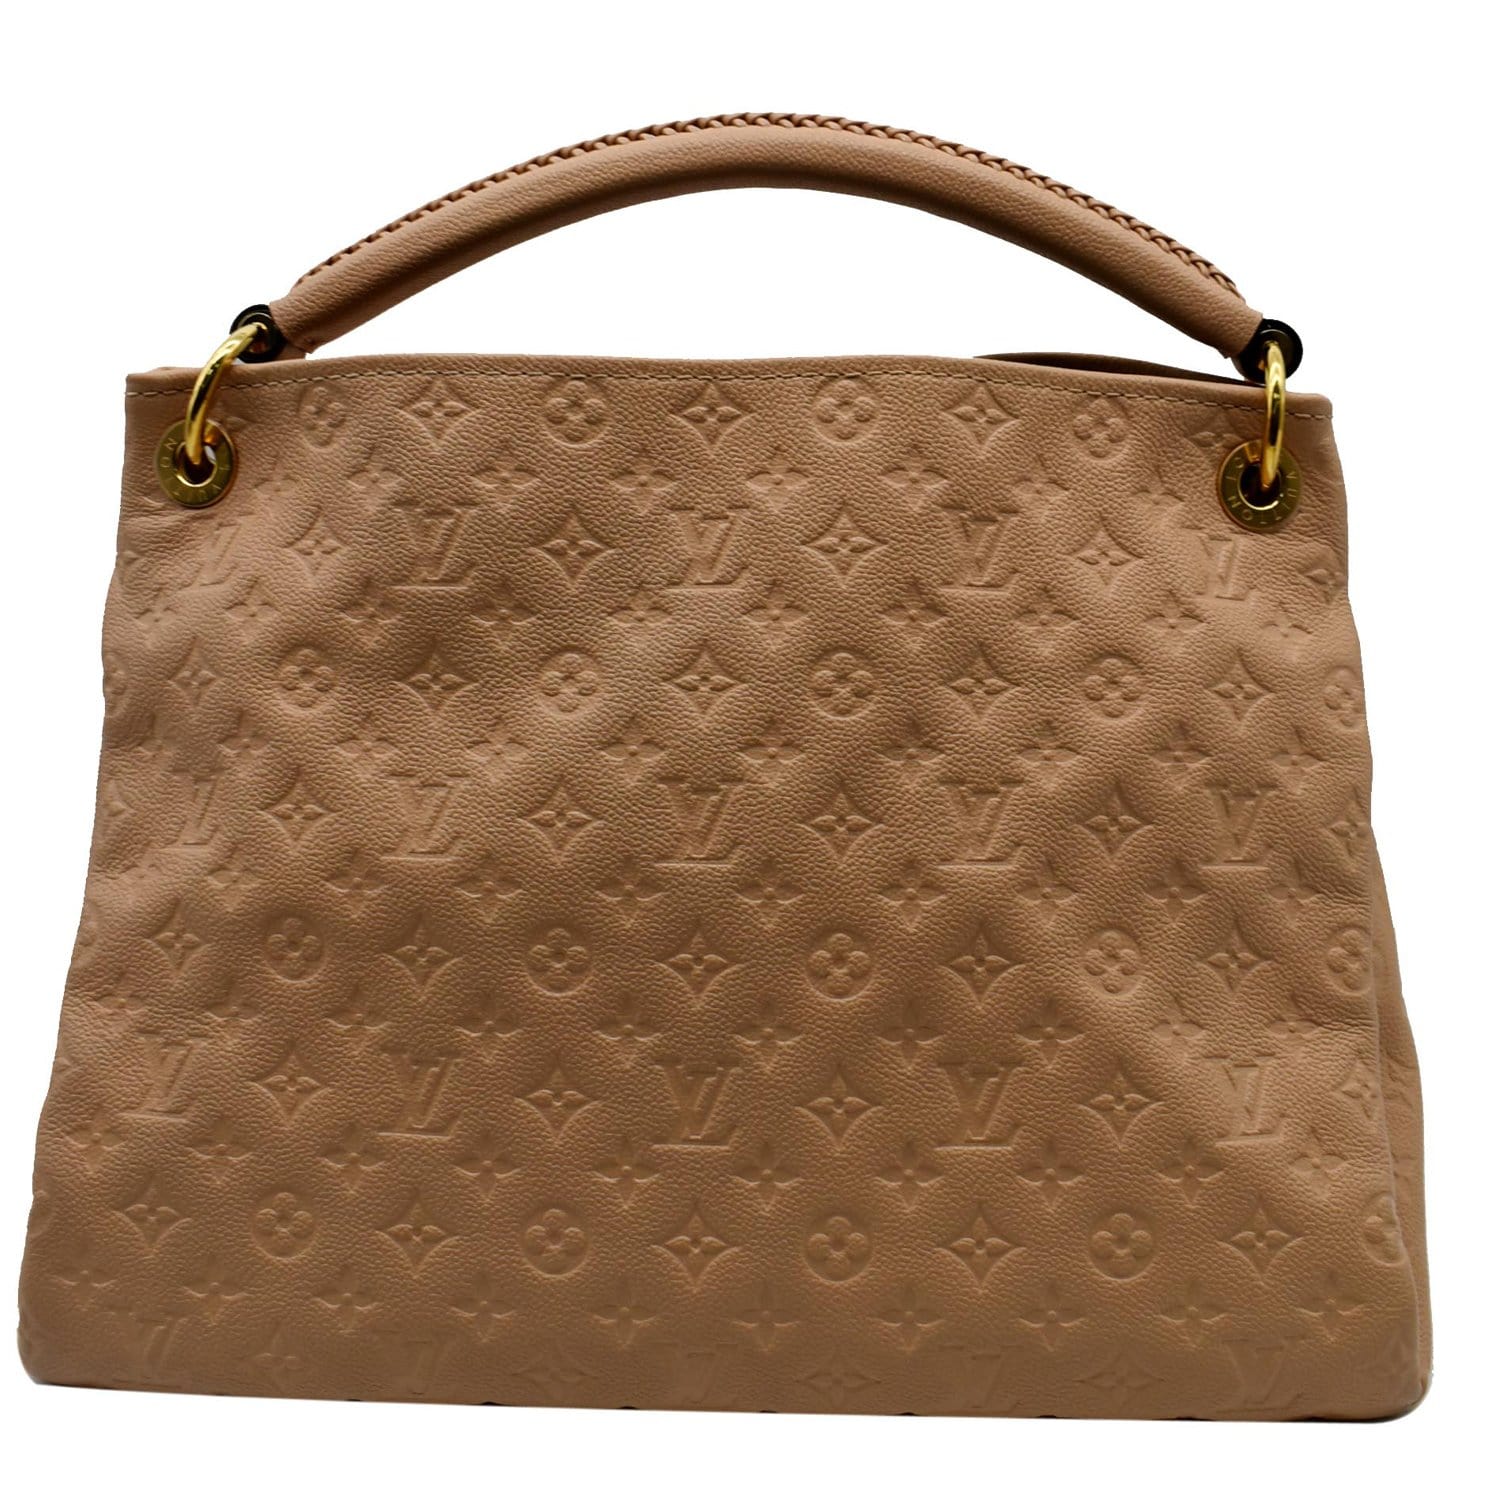 NEW RELEASE! LOUIS VUITTON NEVERFULL MM IN COGNAC (EMPREINTE LEATHER) 